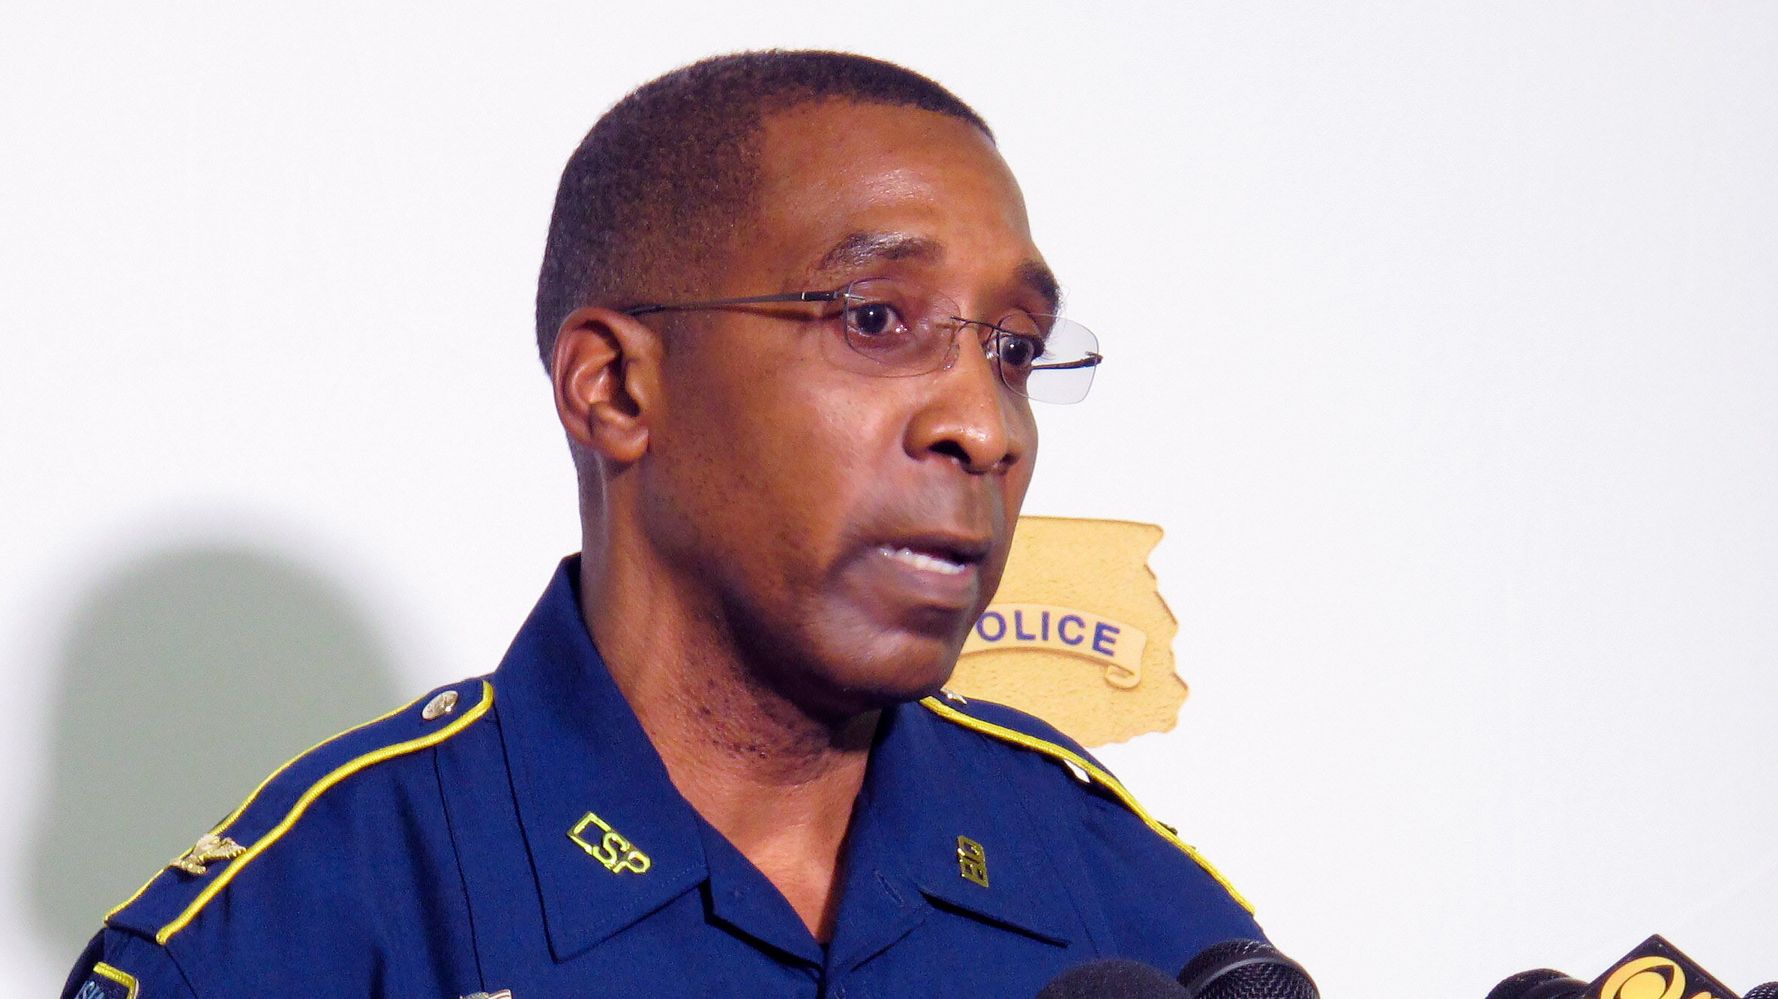 Louisiana State Police Chief Left With Warning After Traffic Stop For